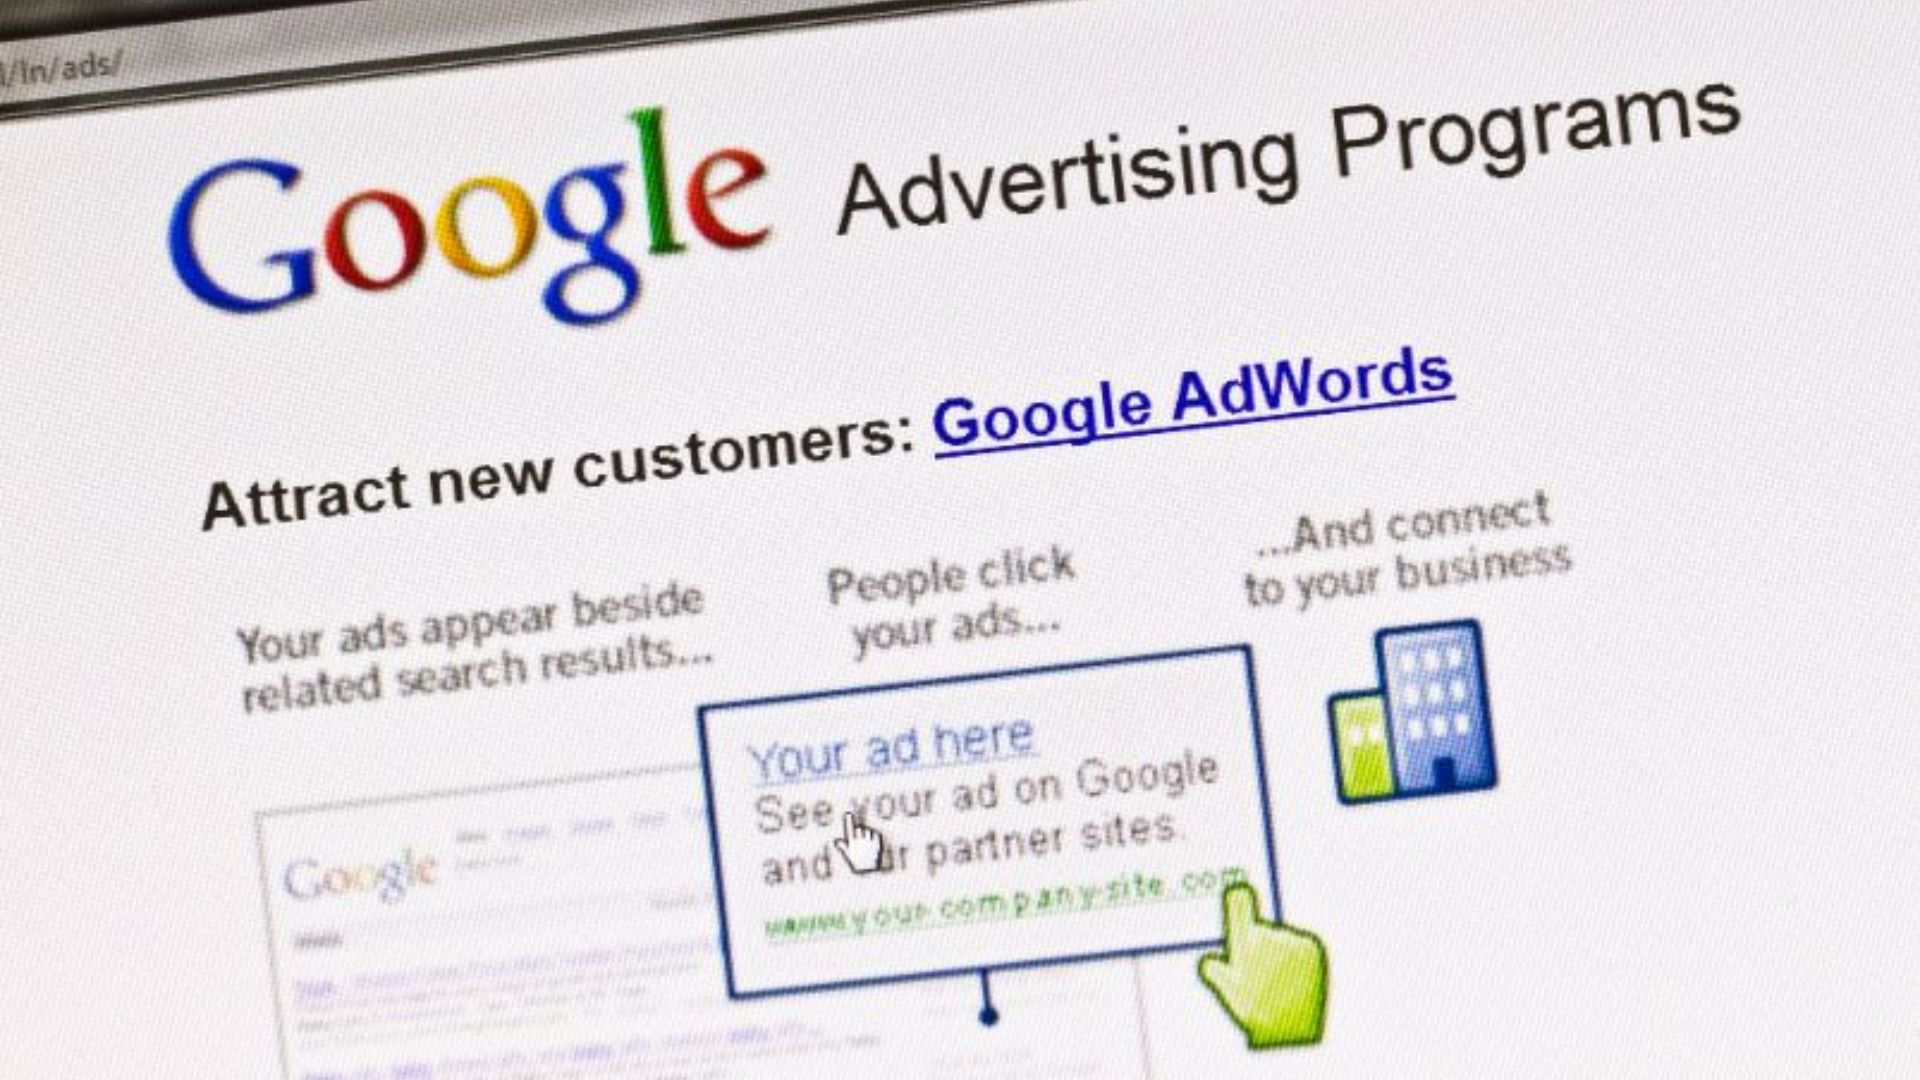 What Is a Good CPC for Google Ads